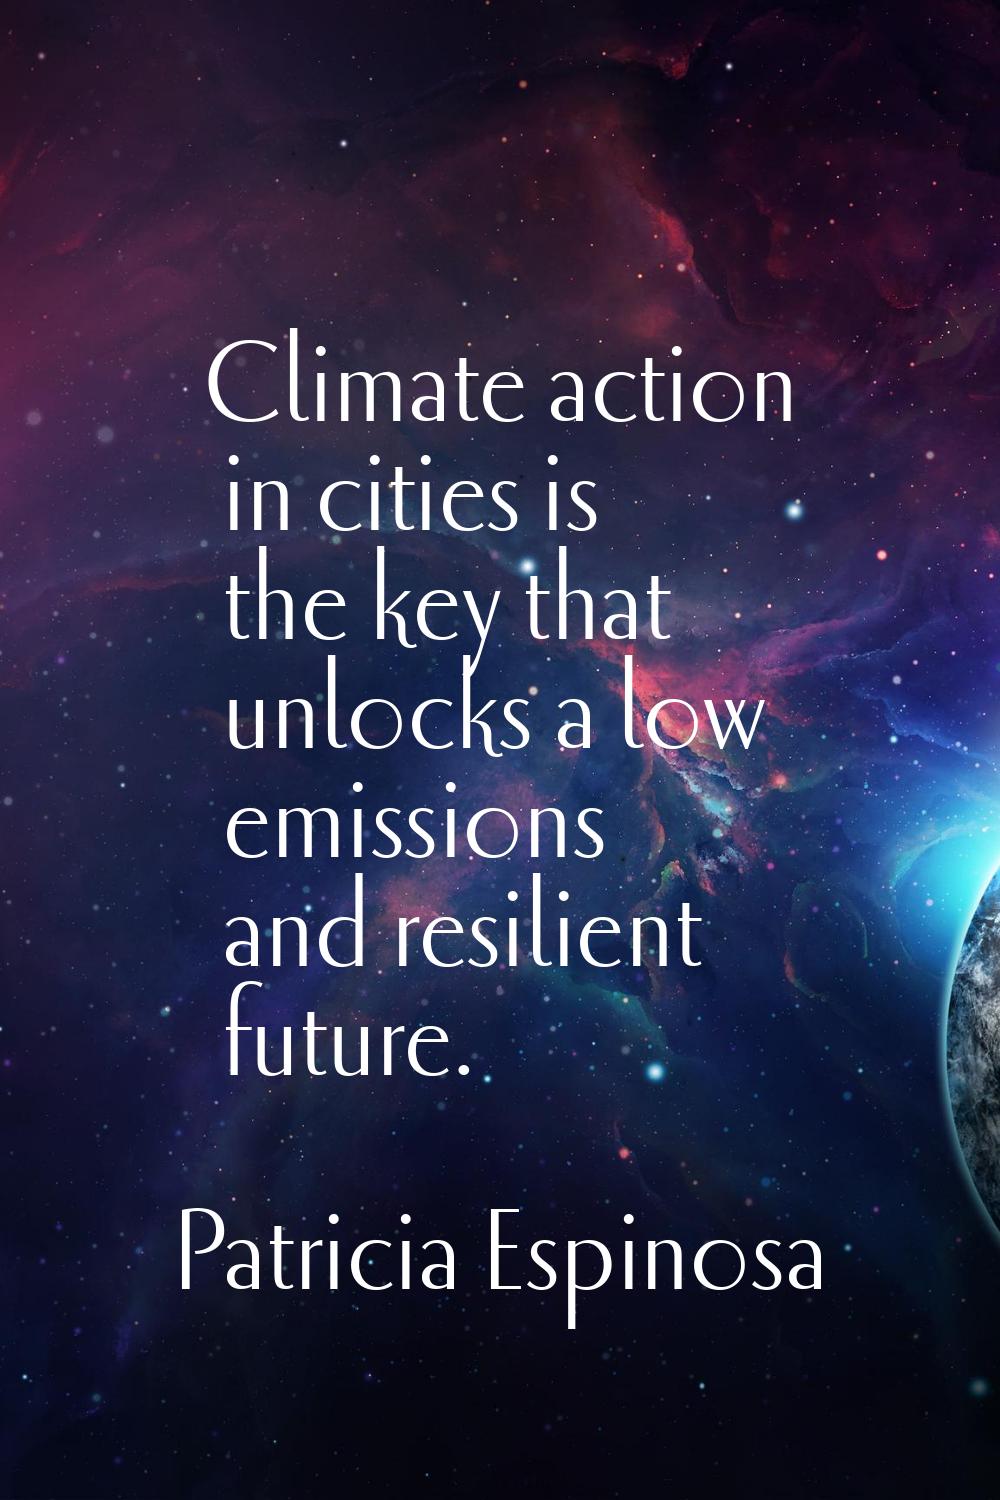 Climate action in cities is the key that unlocks a low emissions and resilient future.